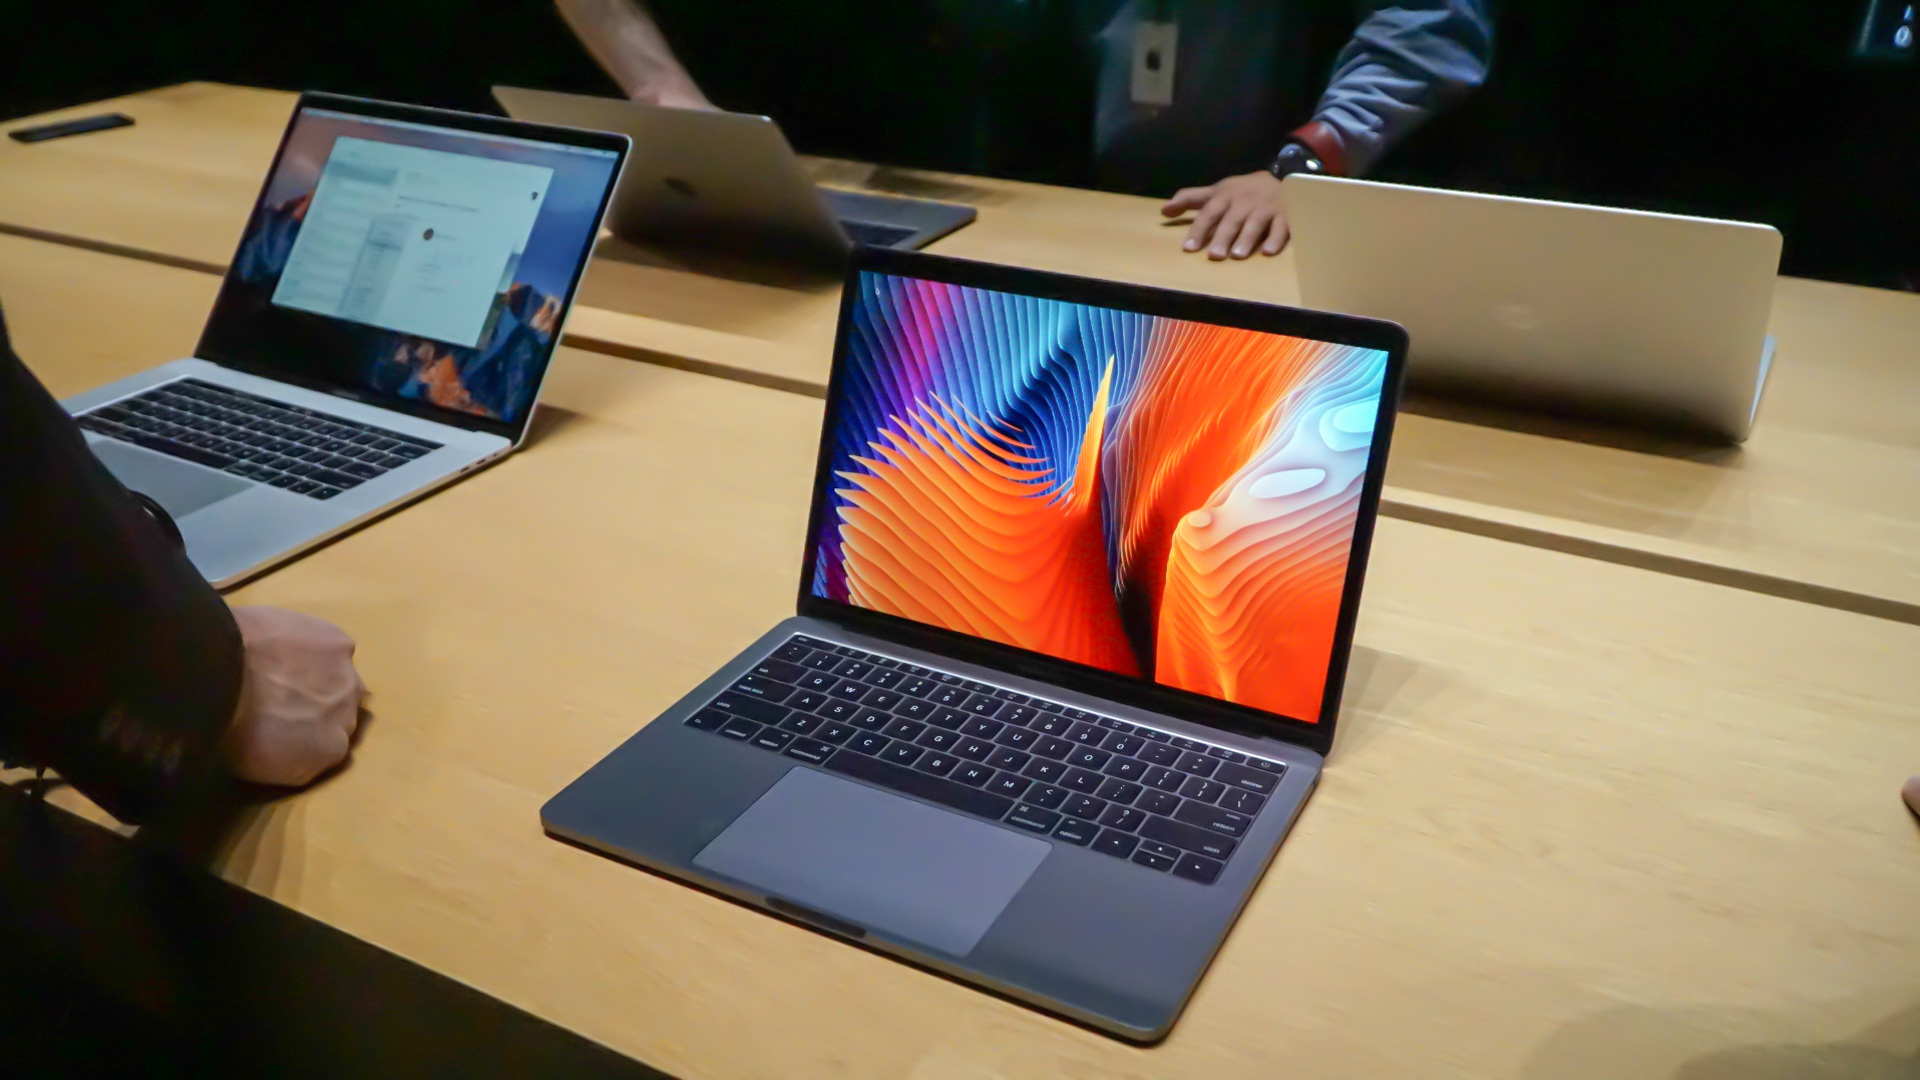 macbook-pro-prices-drop-by-as-much-as-400-in-b-h-s-back-to-school-sale